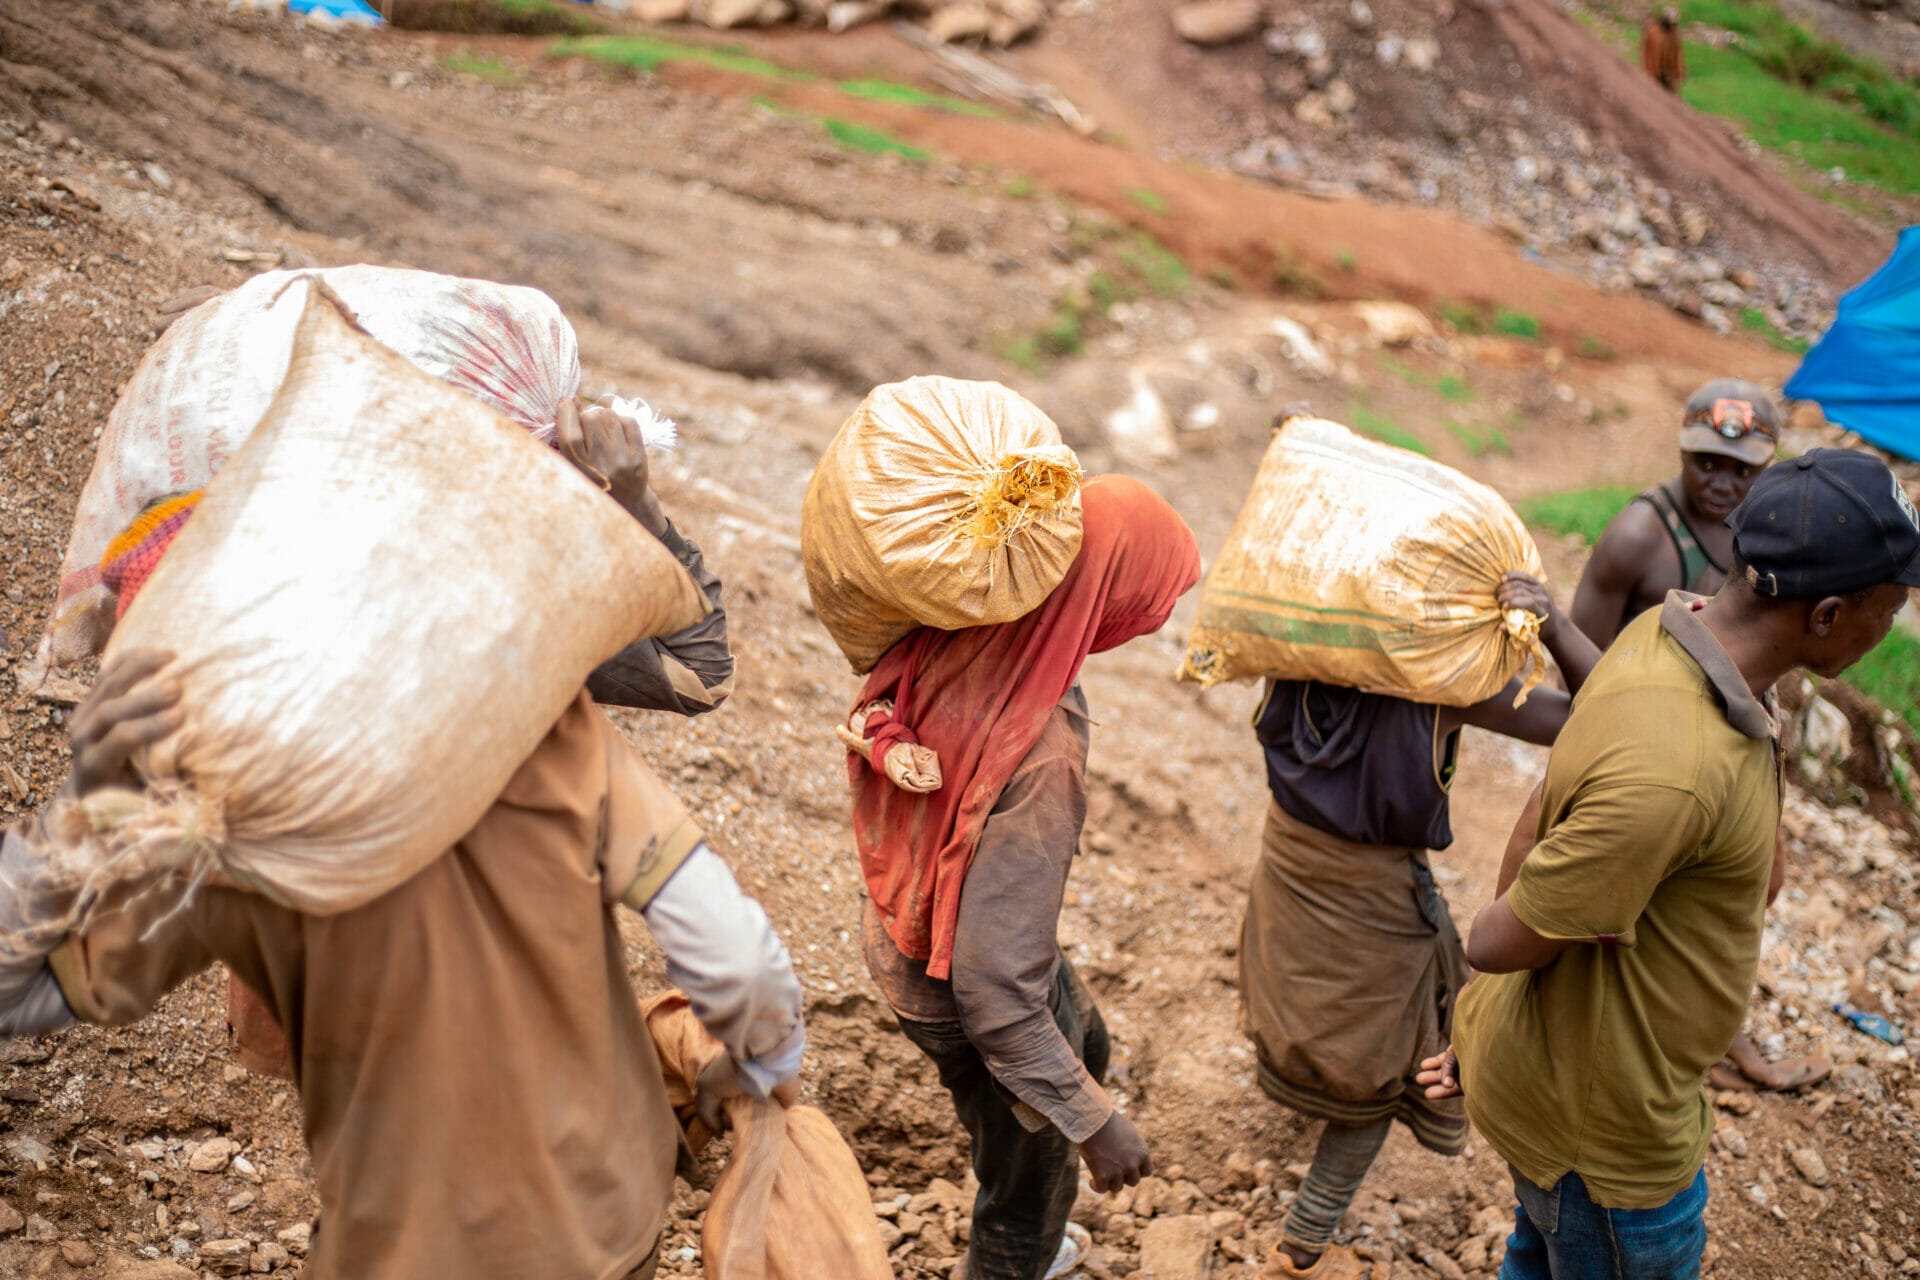 Artisanal miners in DRC